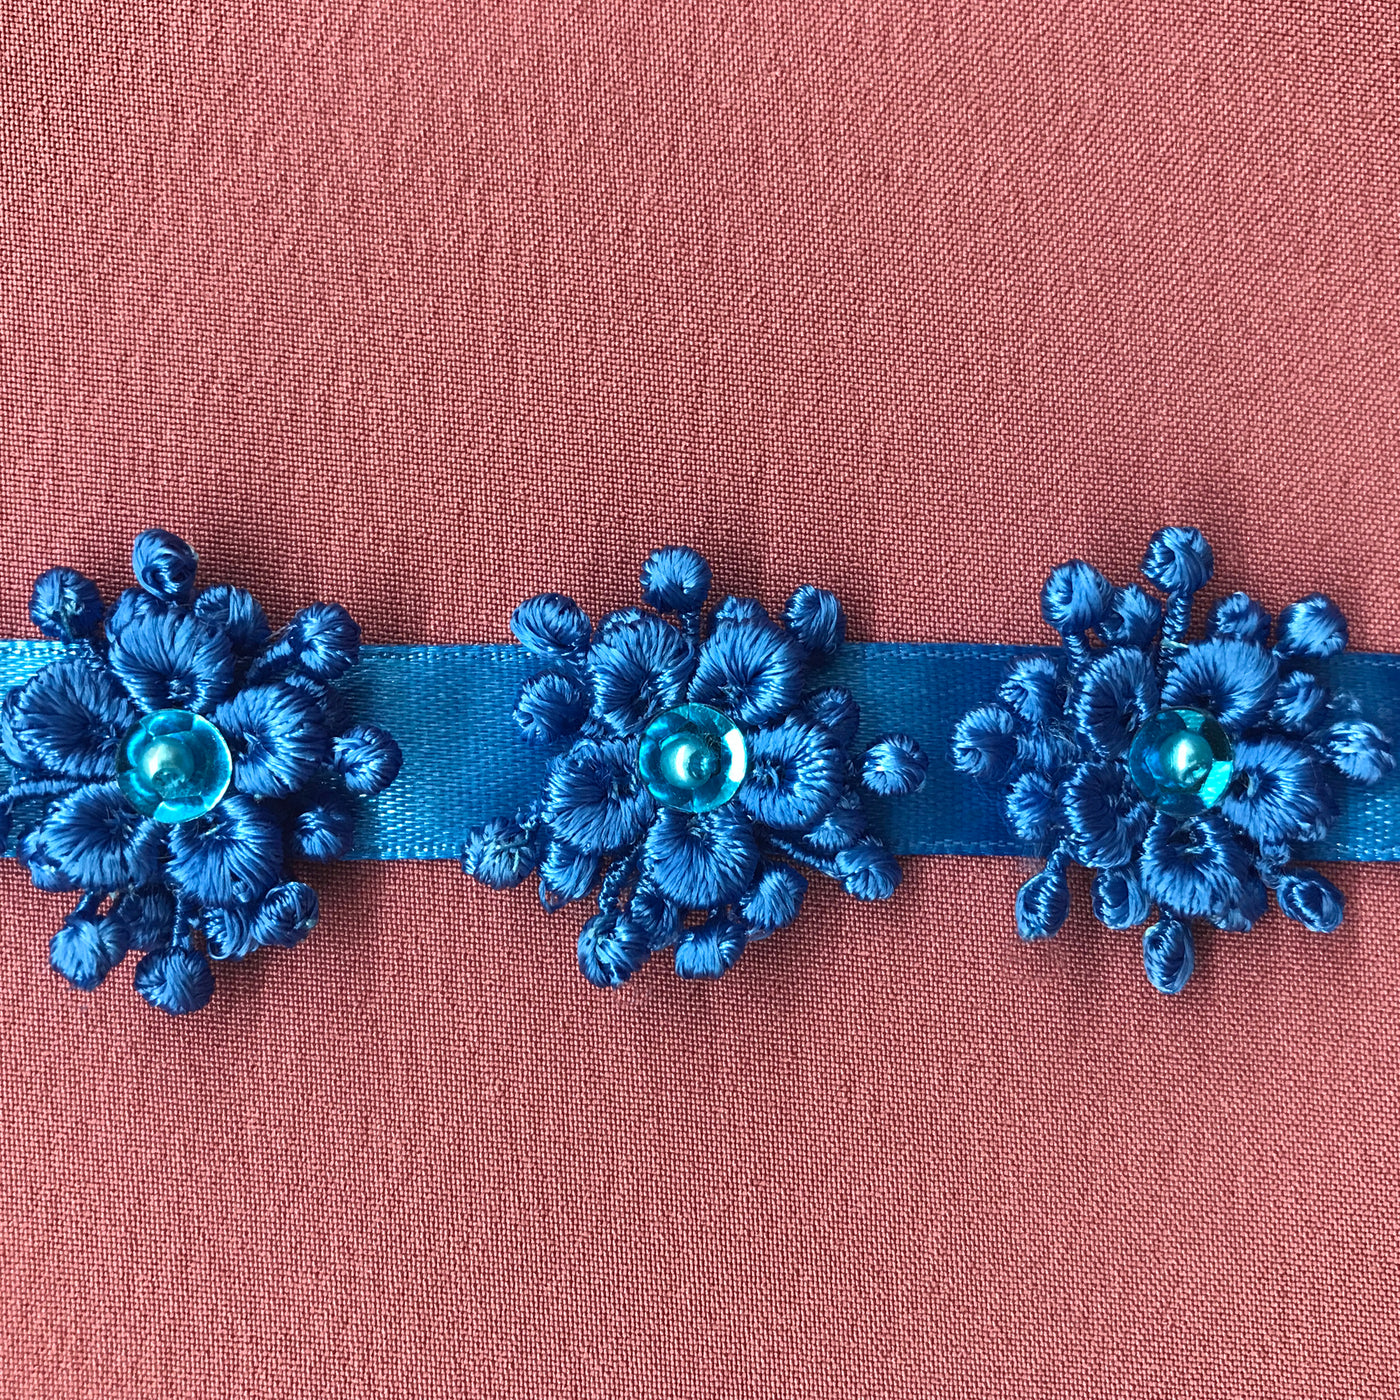 3D Beaded Flower motif on Ribbon Trim Perry Lace Usa